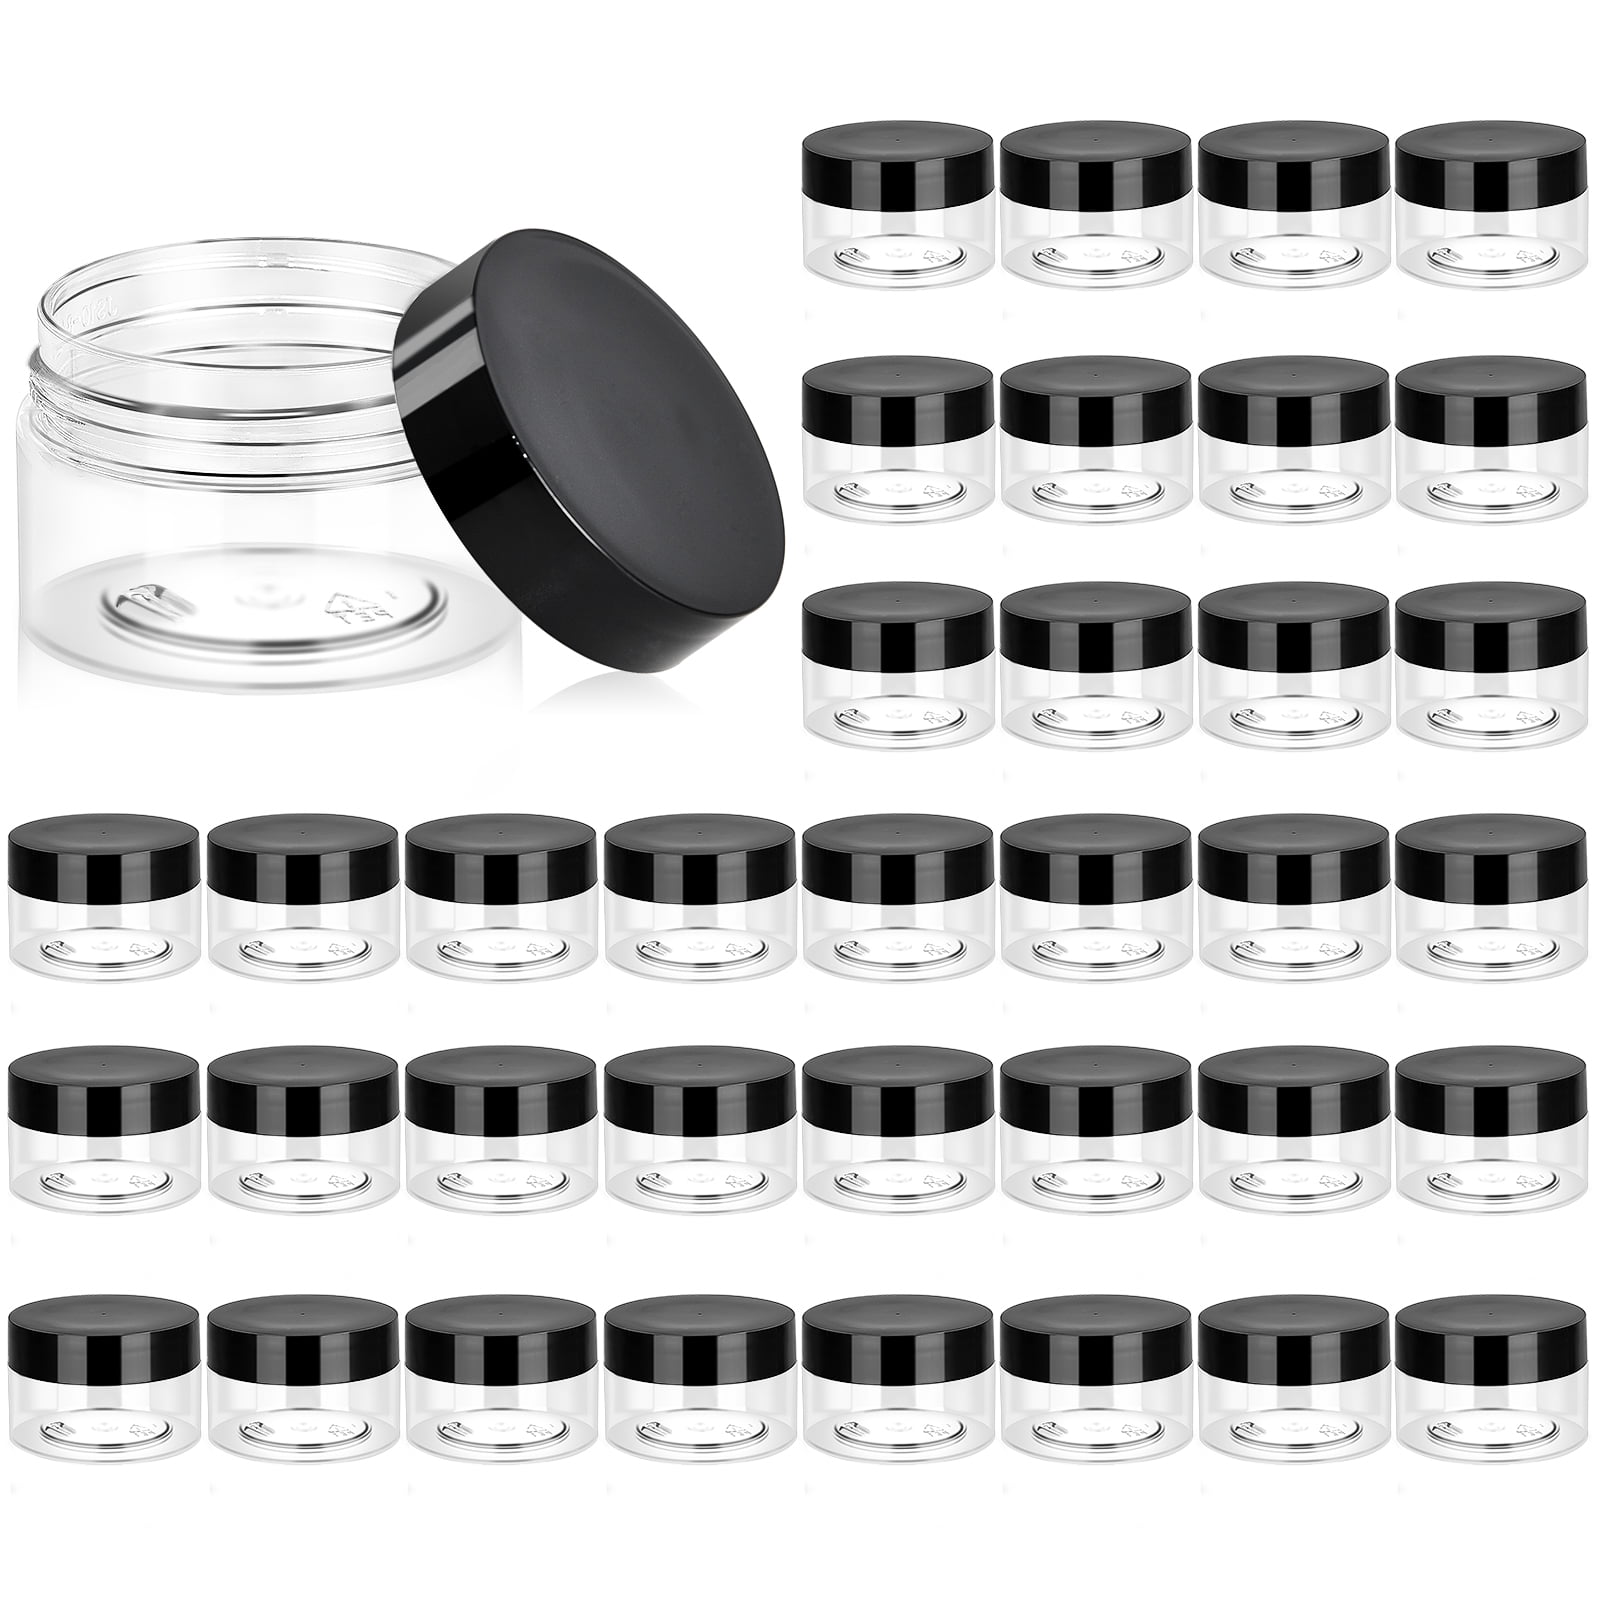 AAOMASSR 8 Pack 12 Oz Clear Plastic Jars with Lids, Slime Containers for  Kids DIY Crafts